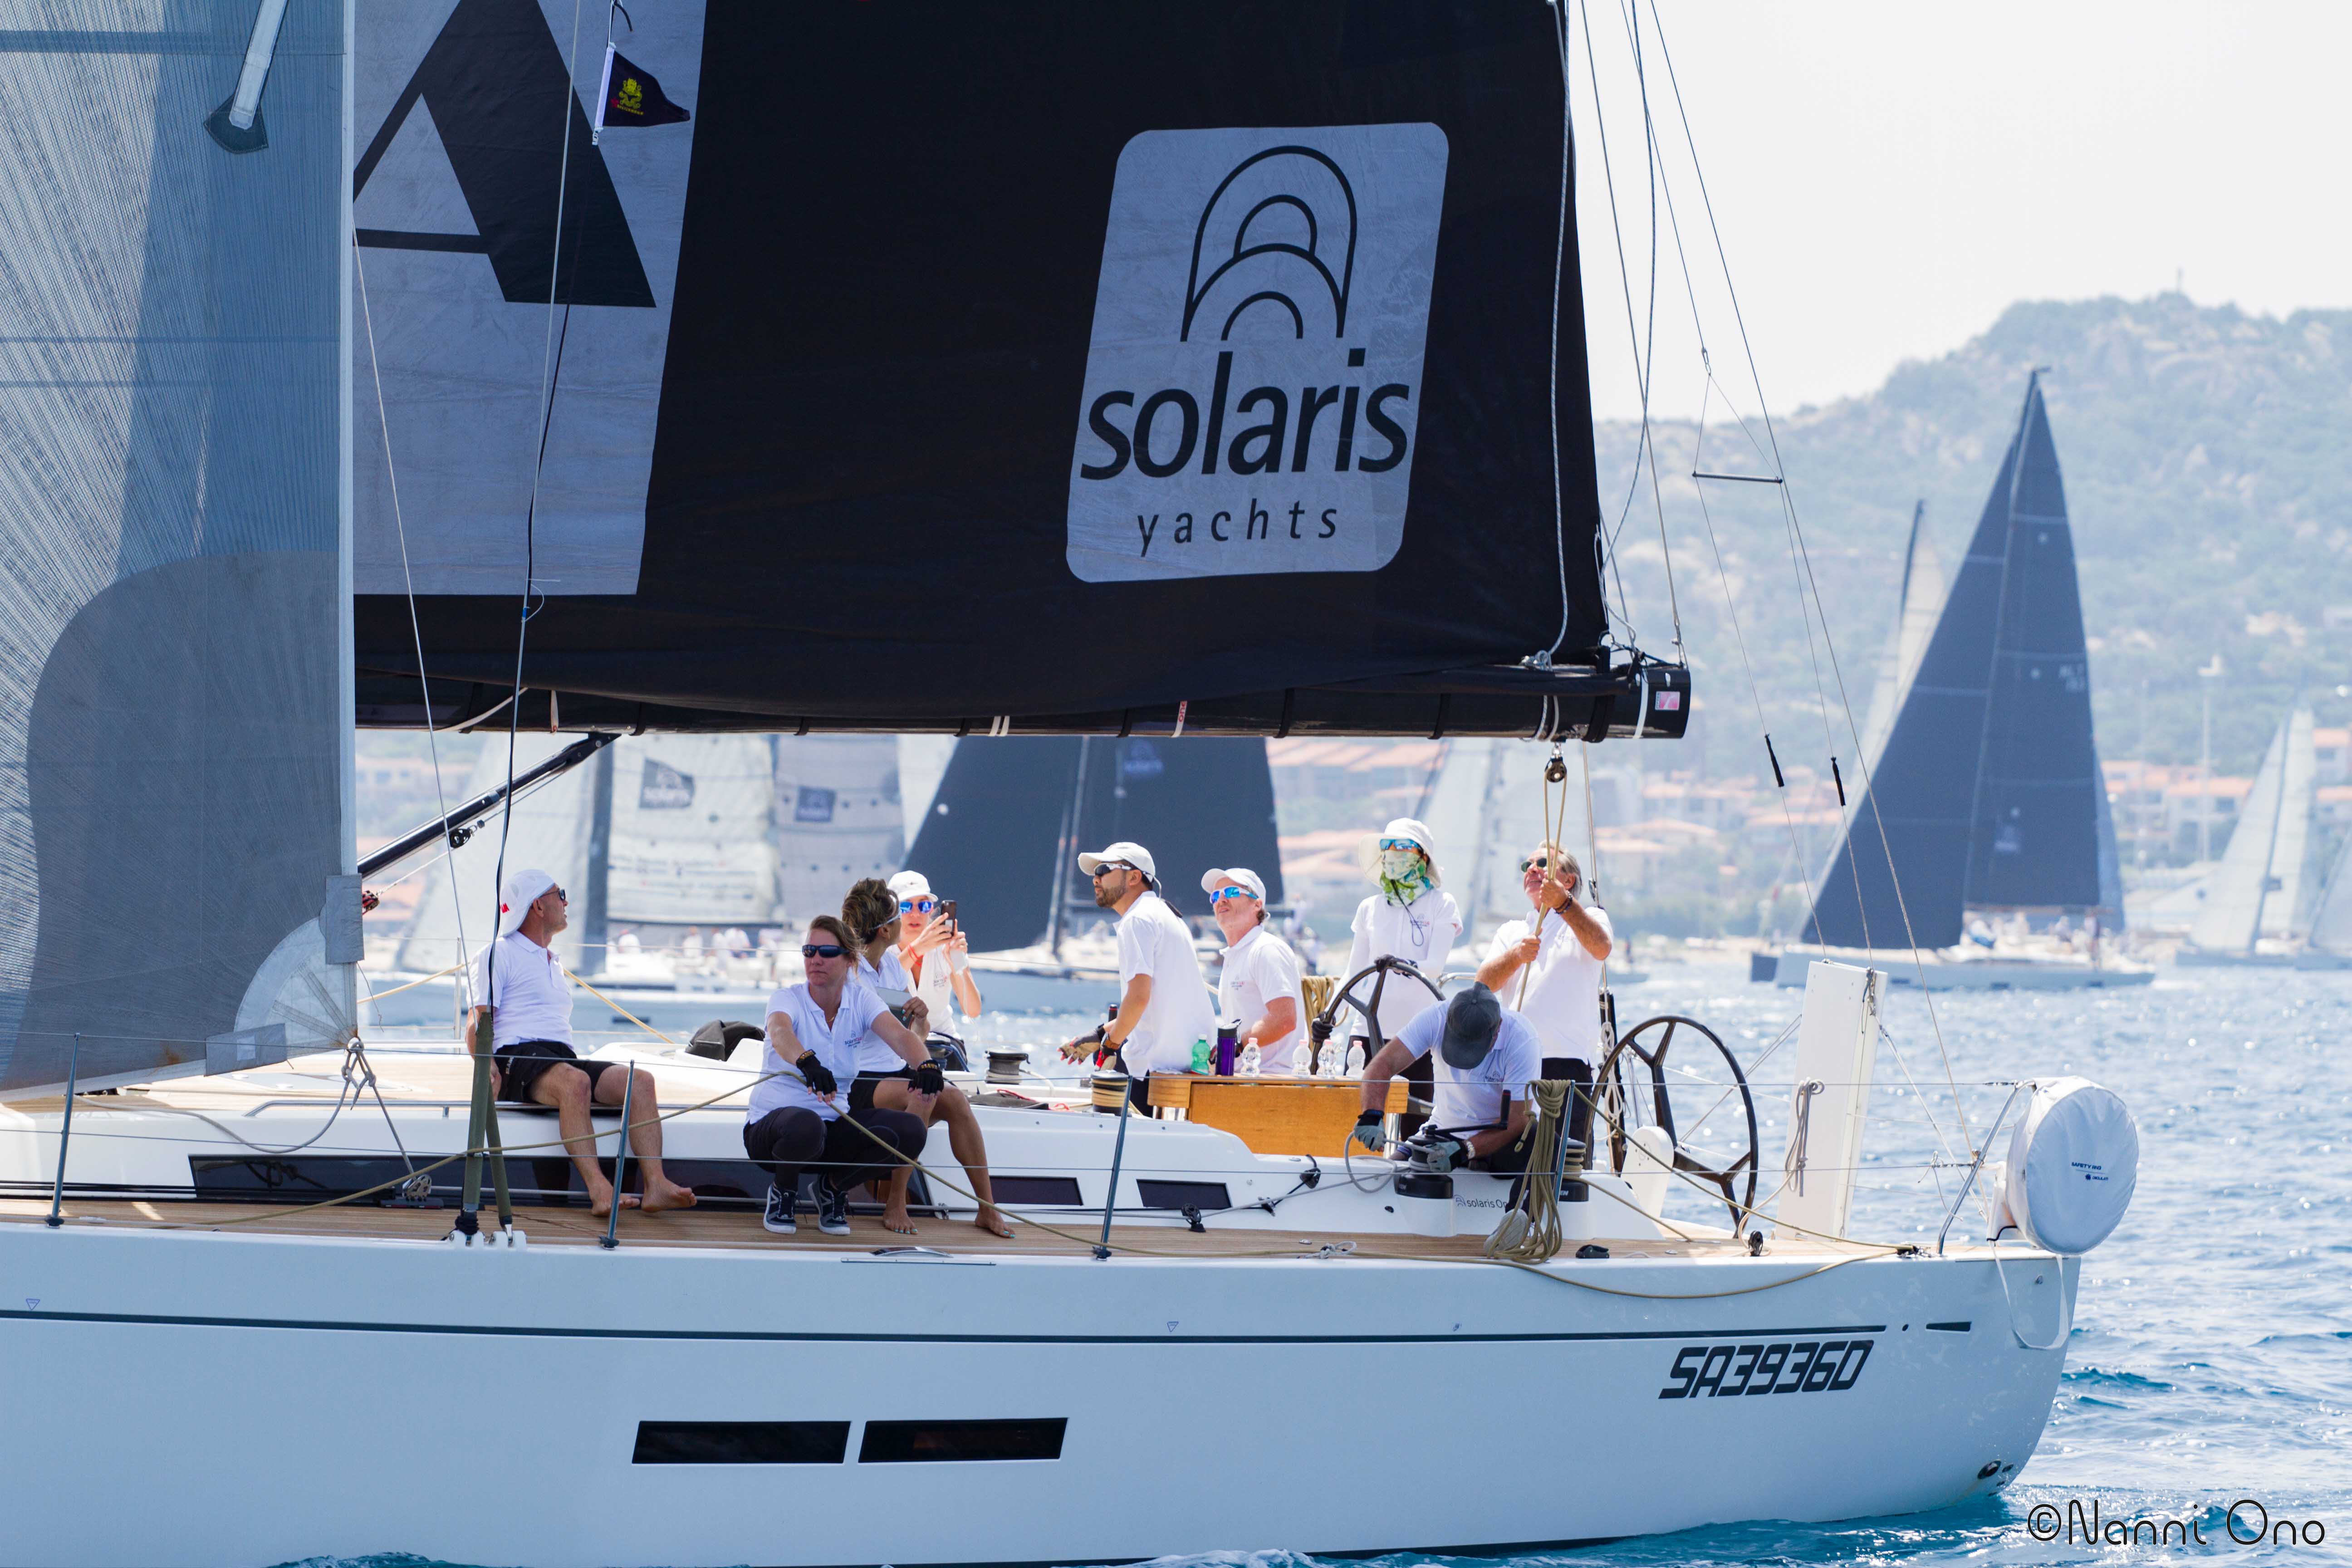 Wong skippering the Solaris One 44 GioiA in the 2018 Solaris Cup in Italy